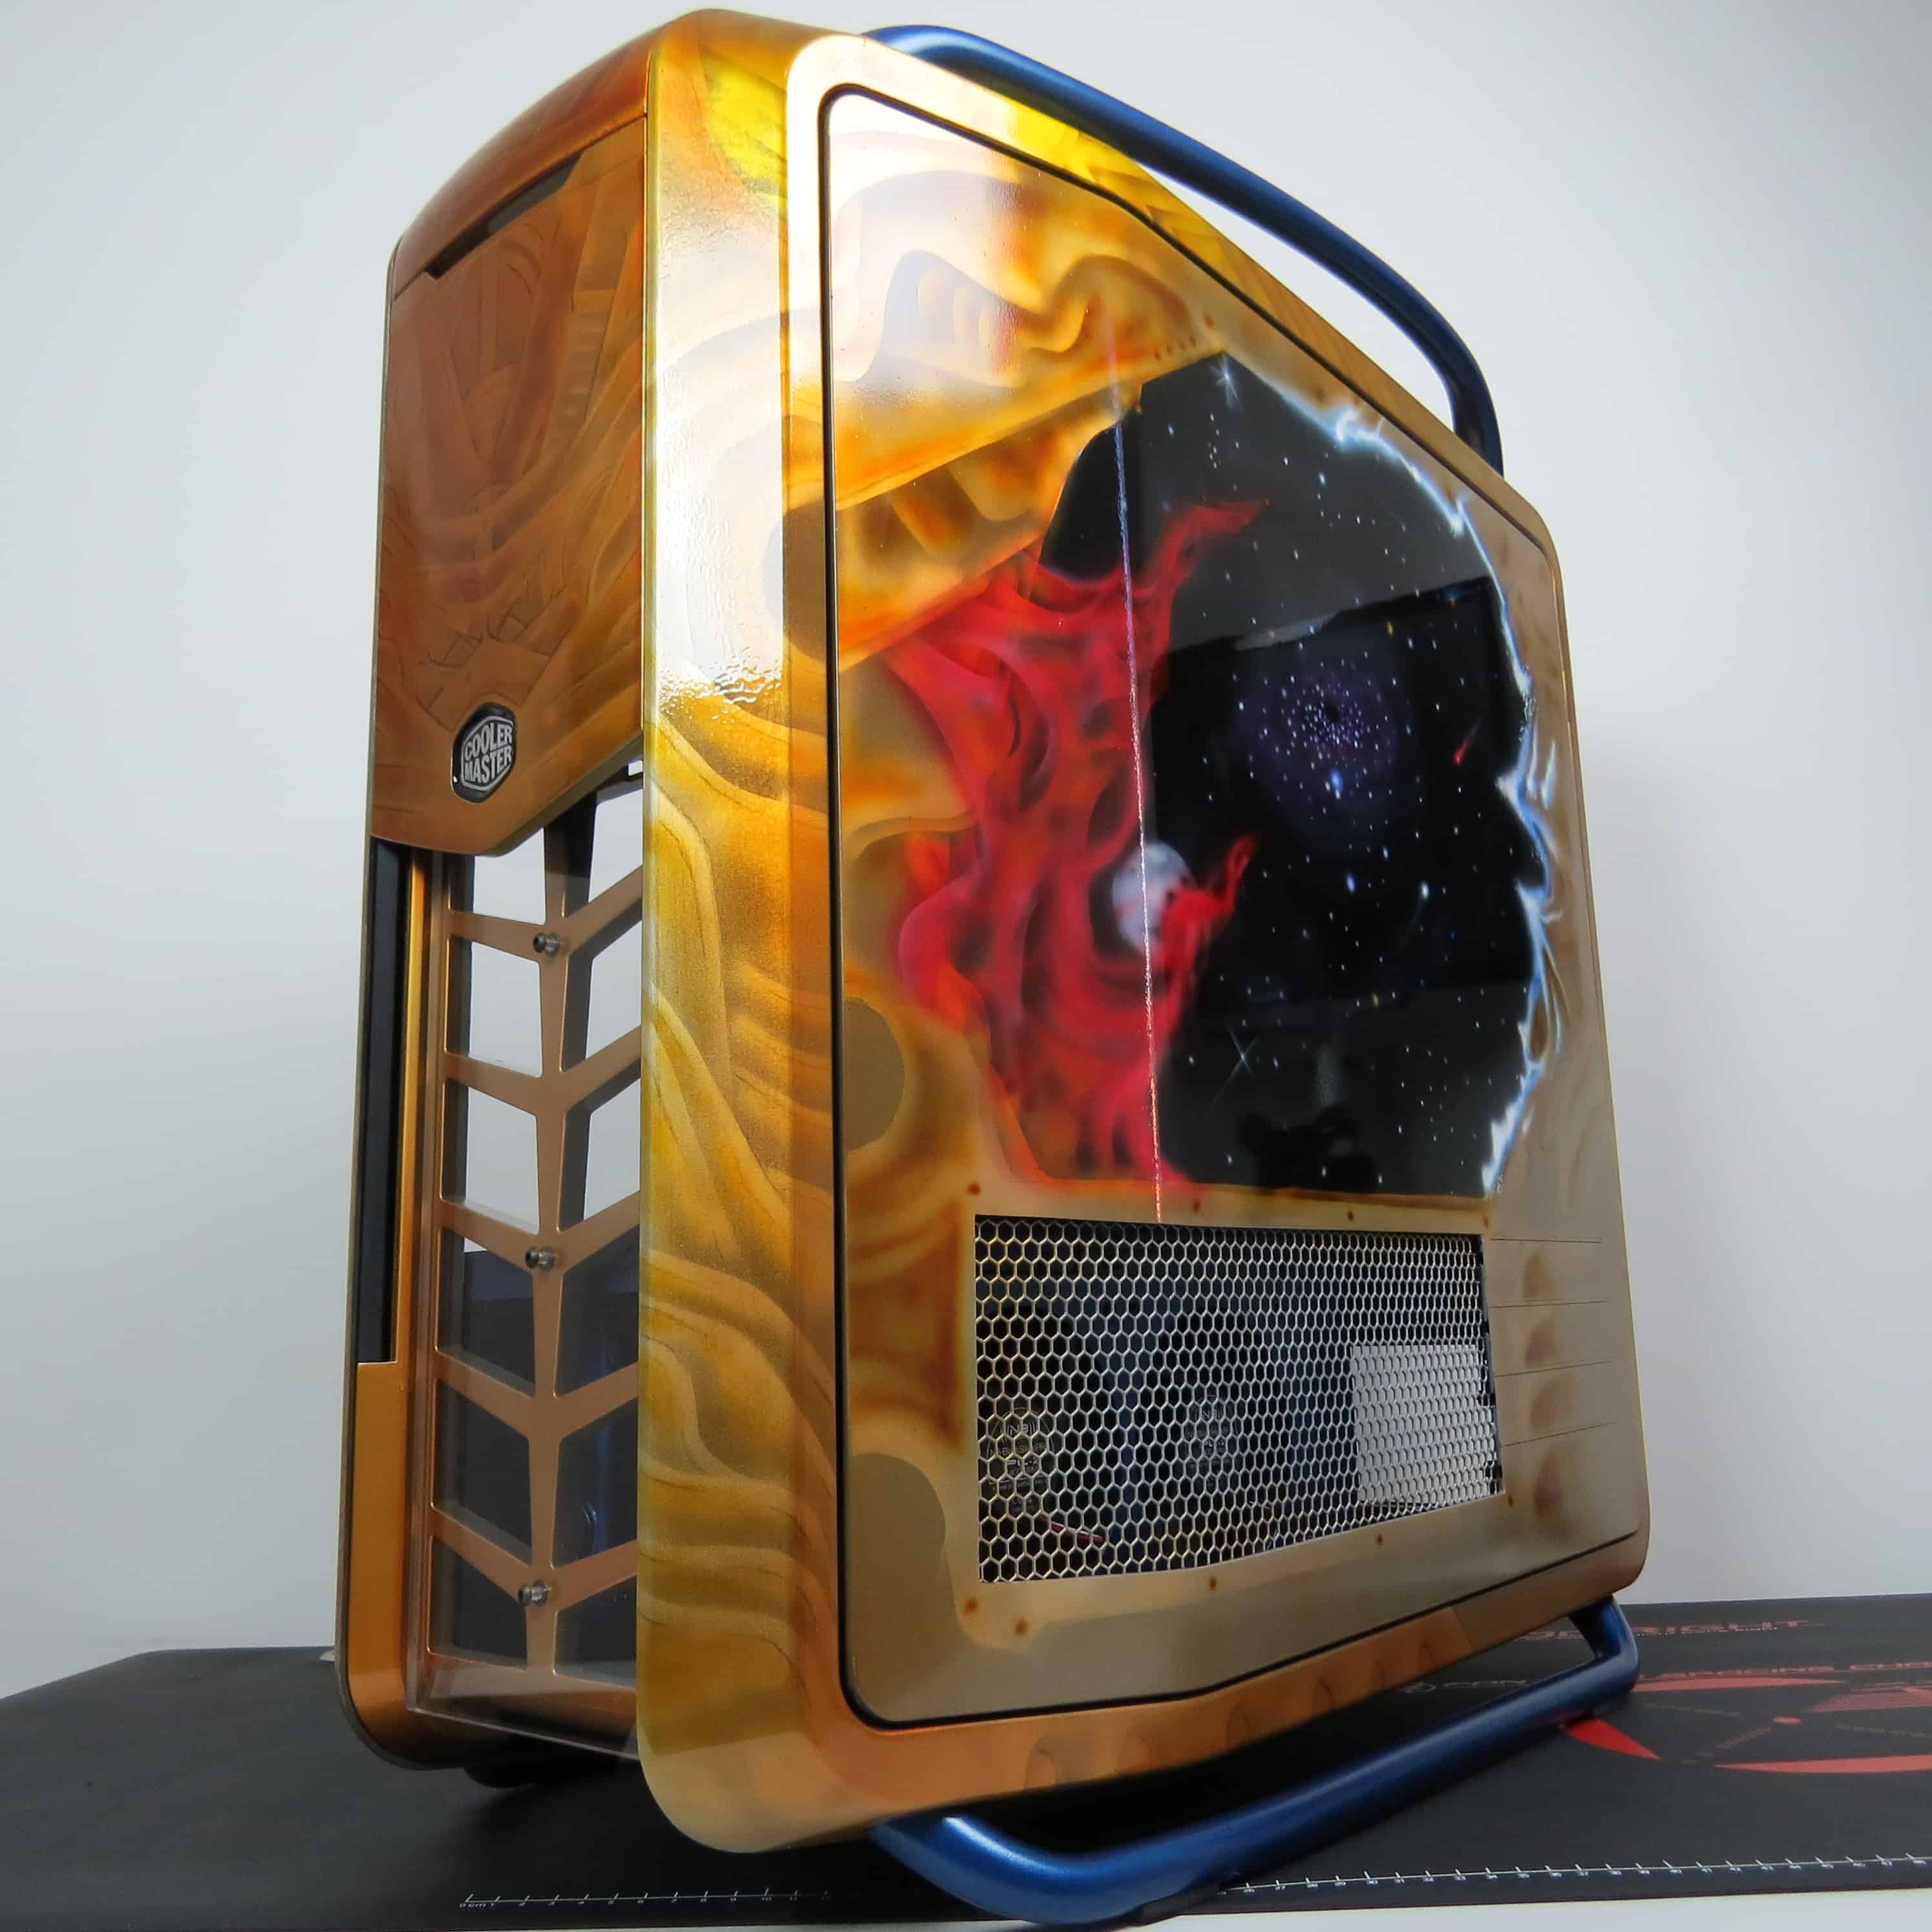 Cooler Master Cosmos II Case Mod By Singularity Computers